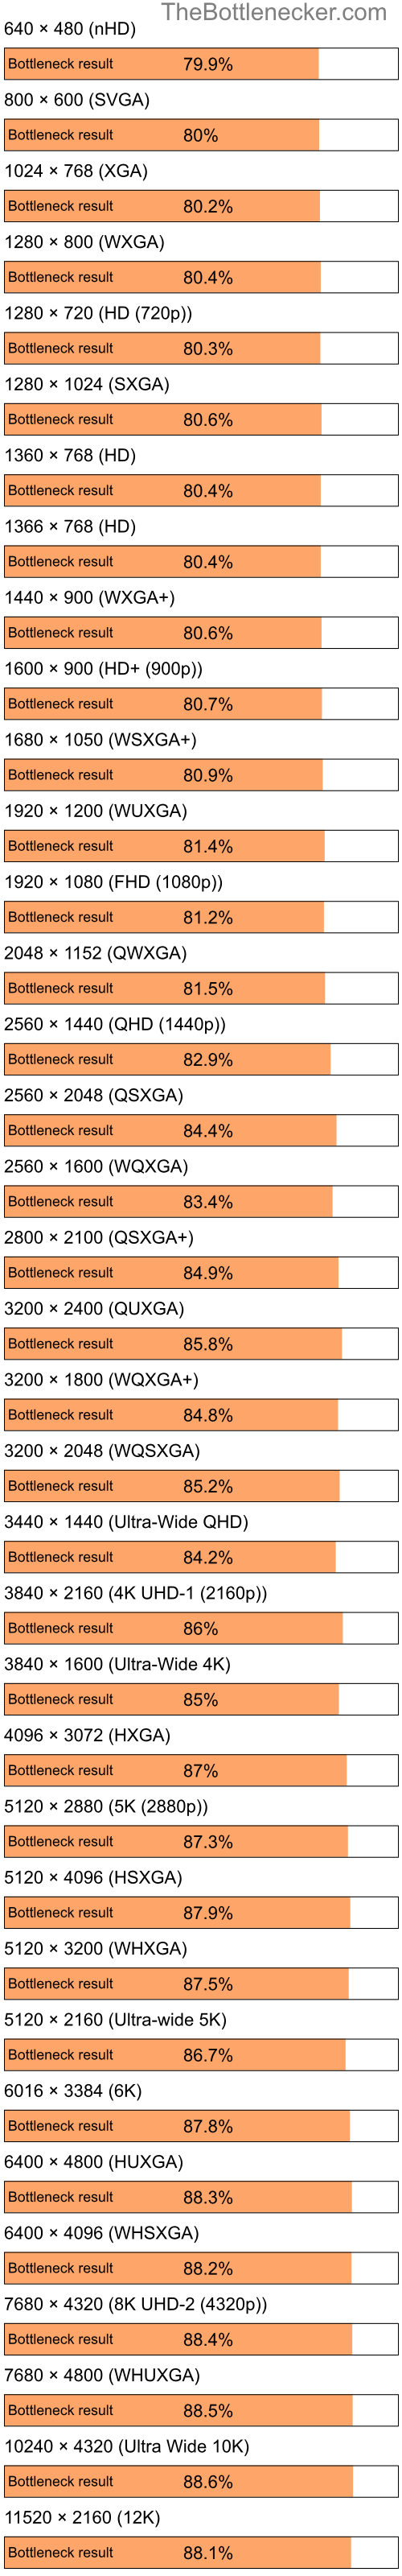 Bottleneck results by resolution for Intel Celeron and AMD Mobility Radeon X1300 in Graphic Card Intense Tasks